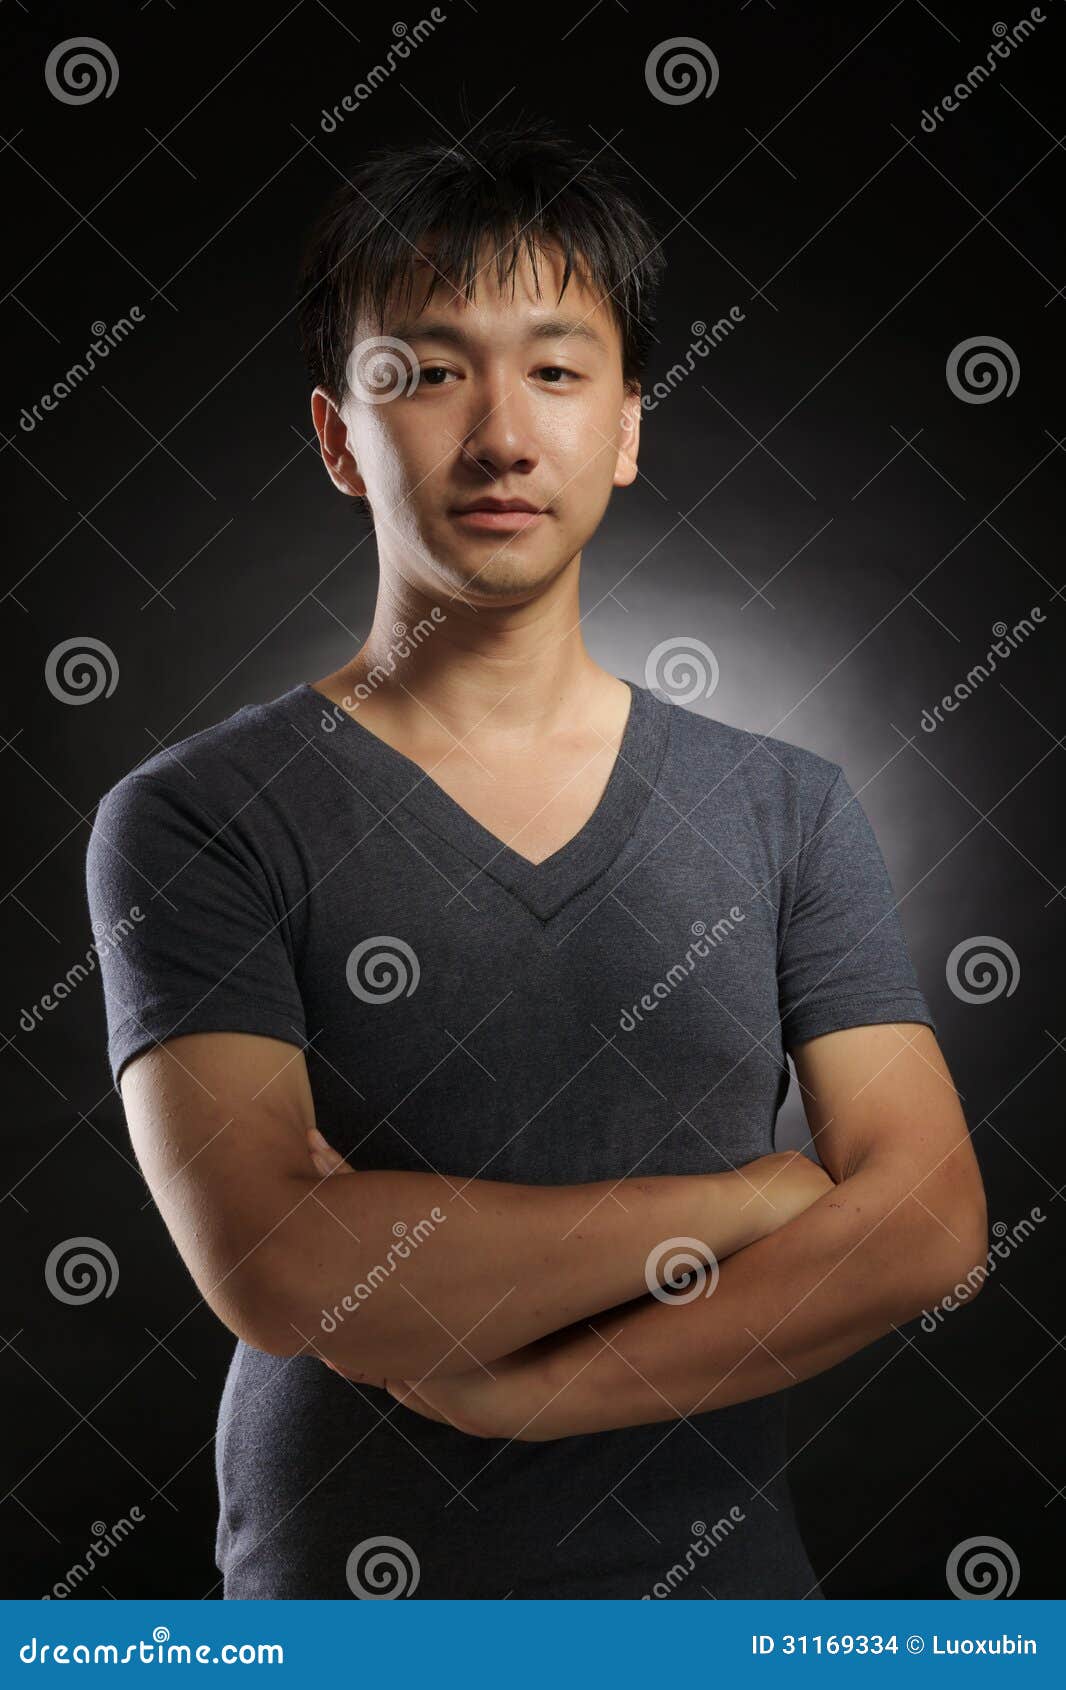 Young asian man portrait stock photo. Image of chinese - 31169334